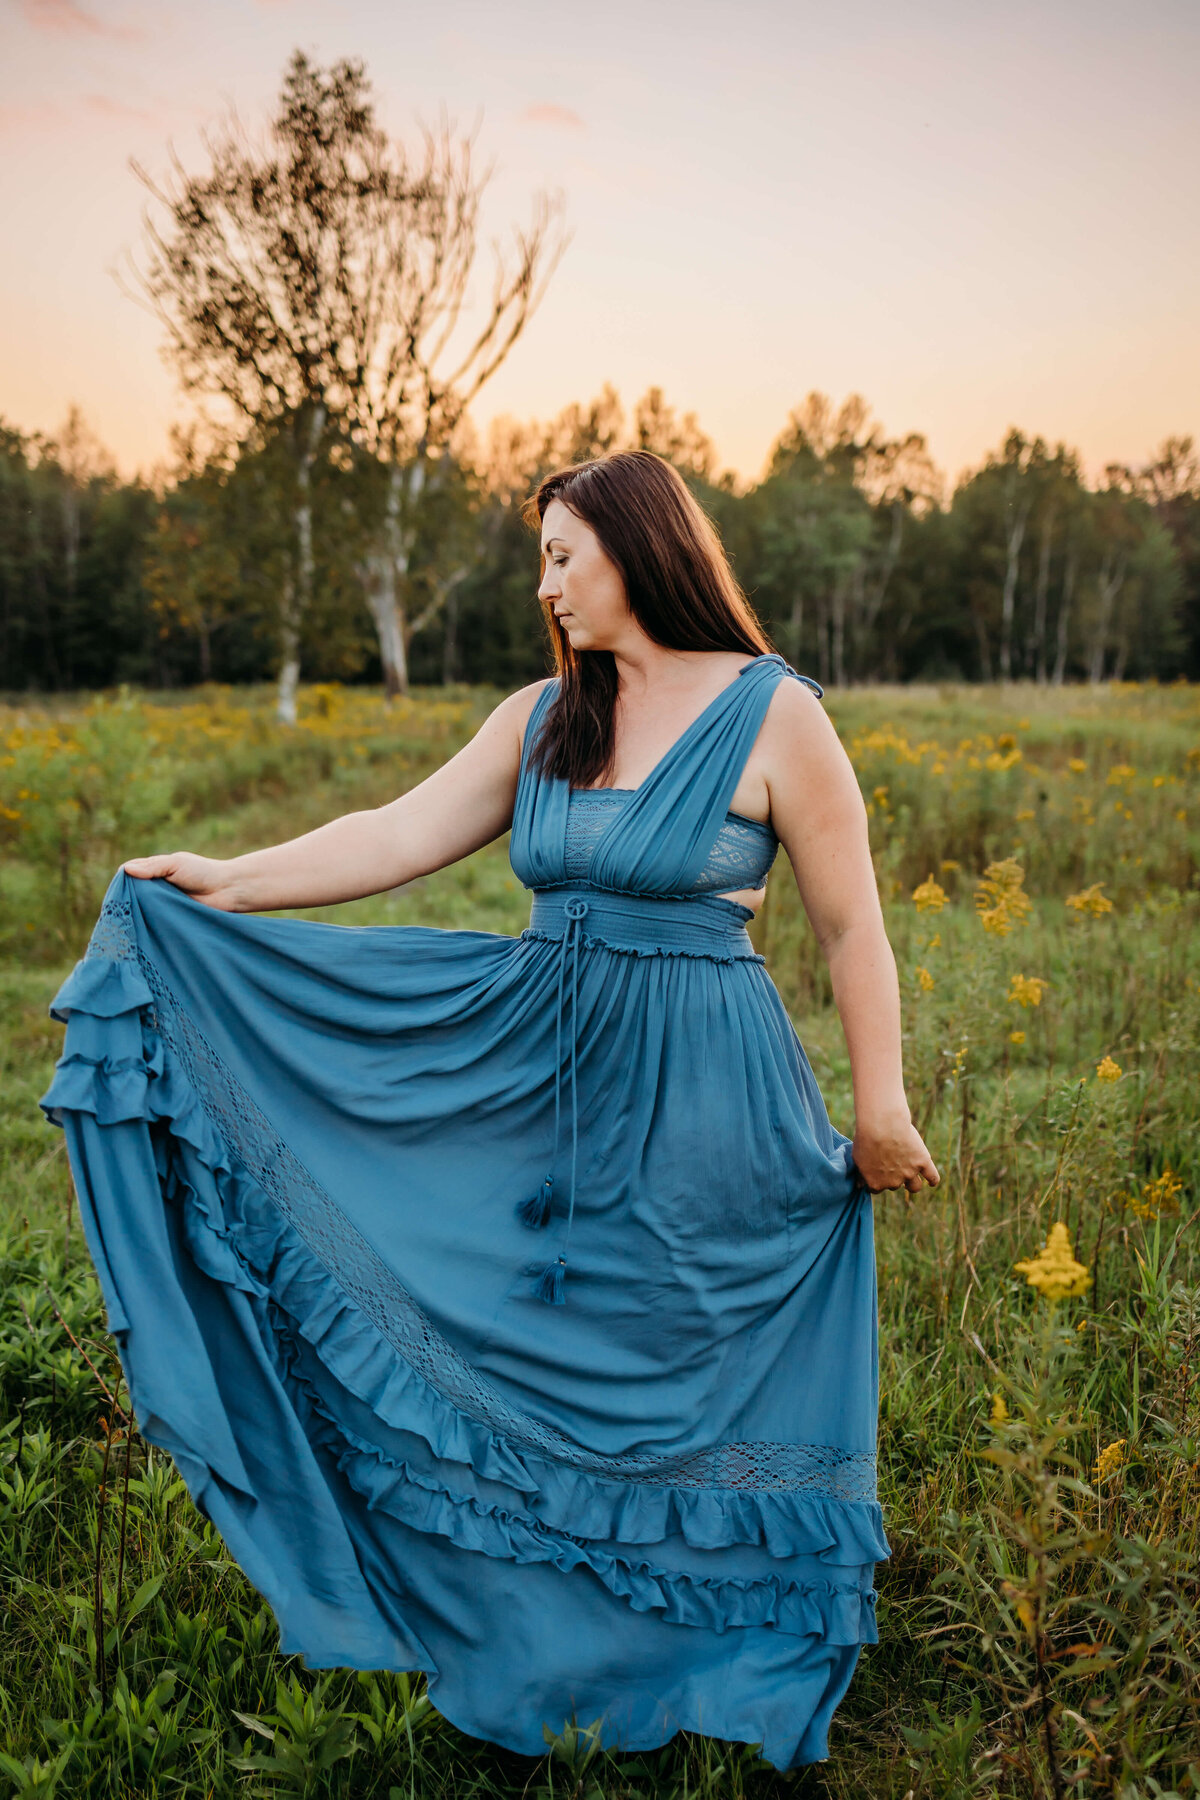 mom twirling blue dress in field during sunset